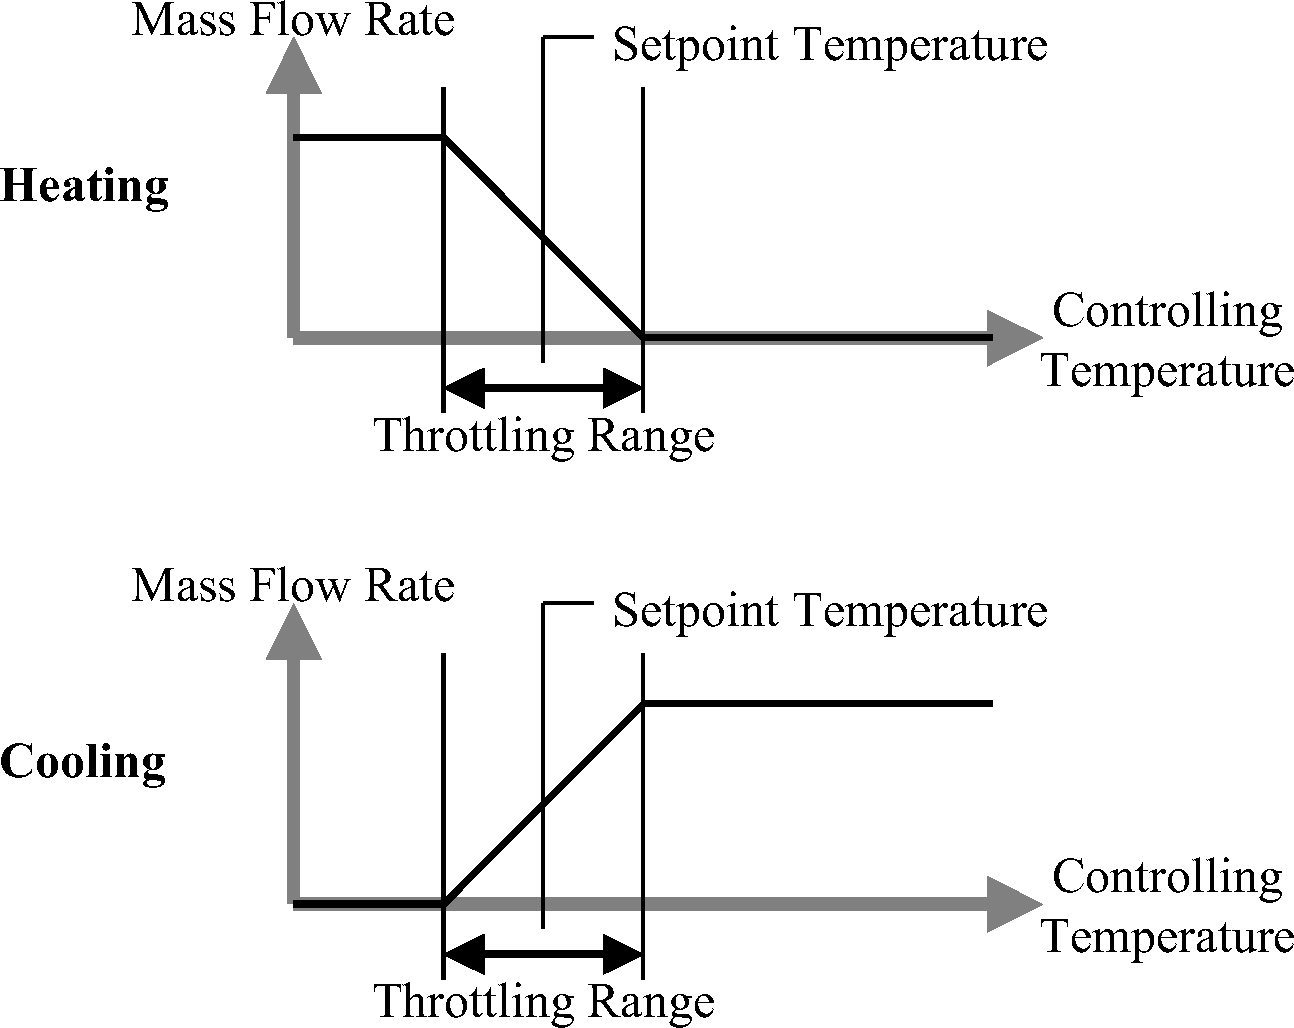 Variable Flow Low Temperature Radiant System Controls [fig:variable-flow-low-temperature-radiant-system]